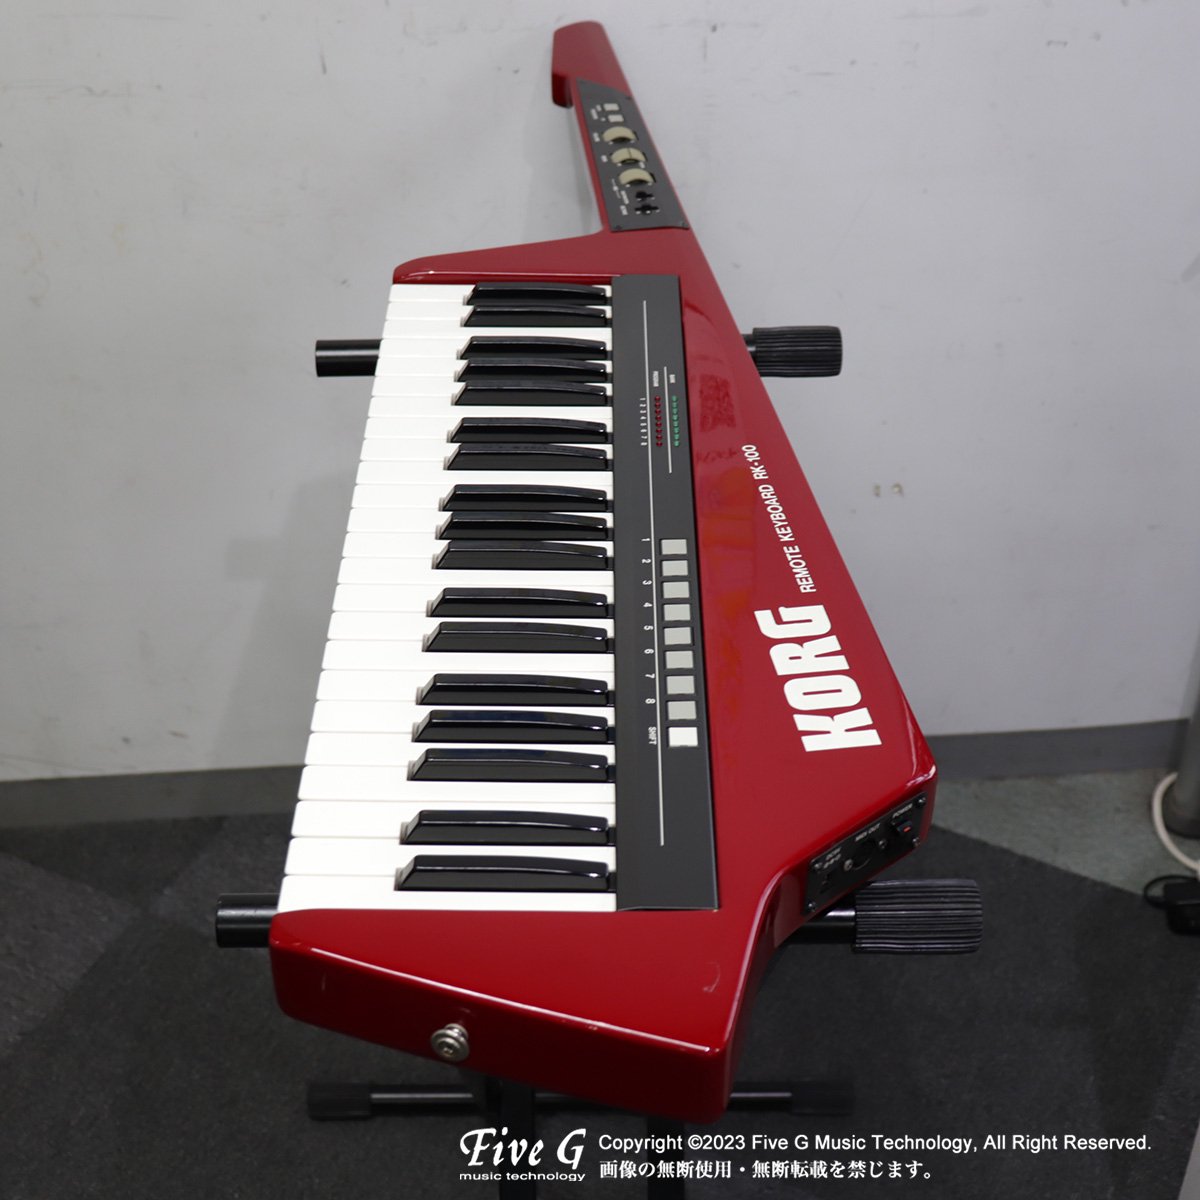 KORG | RK-100 Red | 中古 - Used - シンセサイザー キーボード | Five